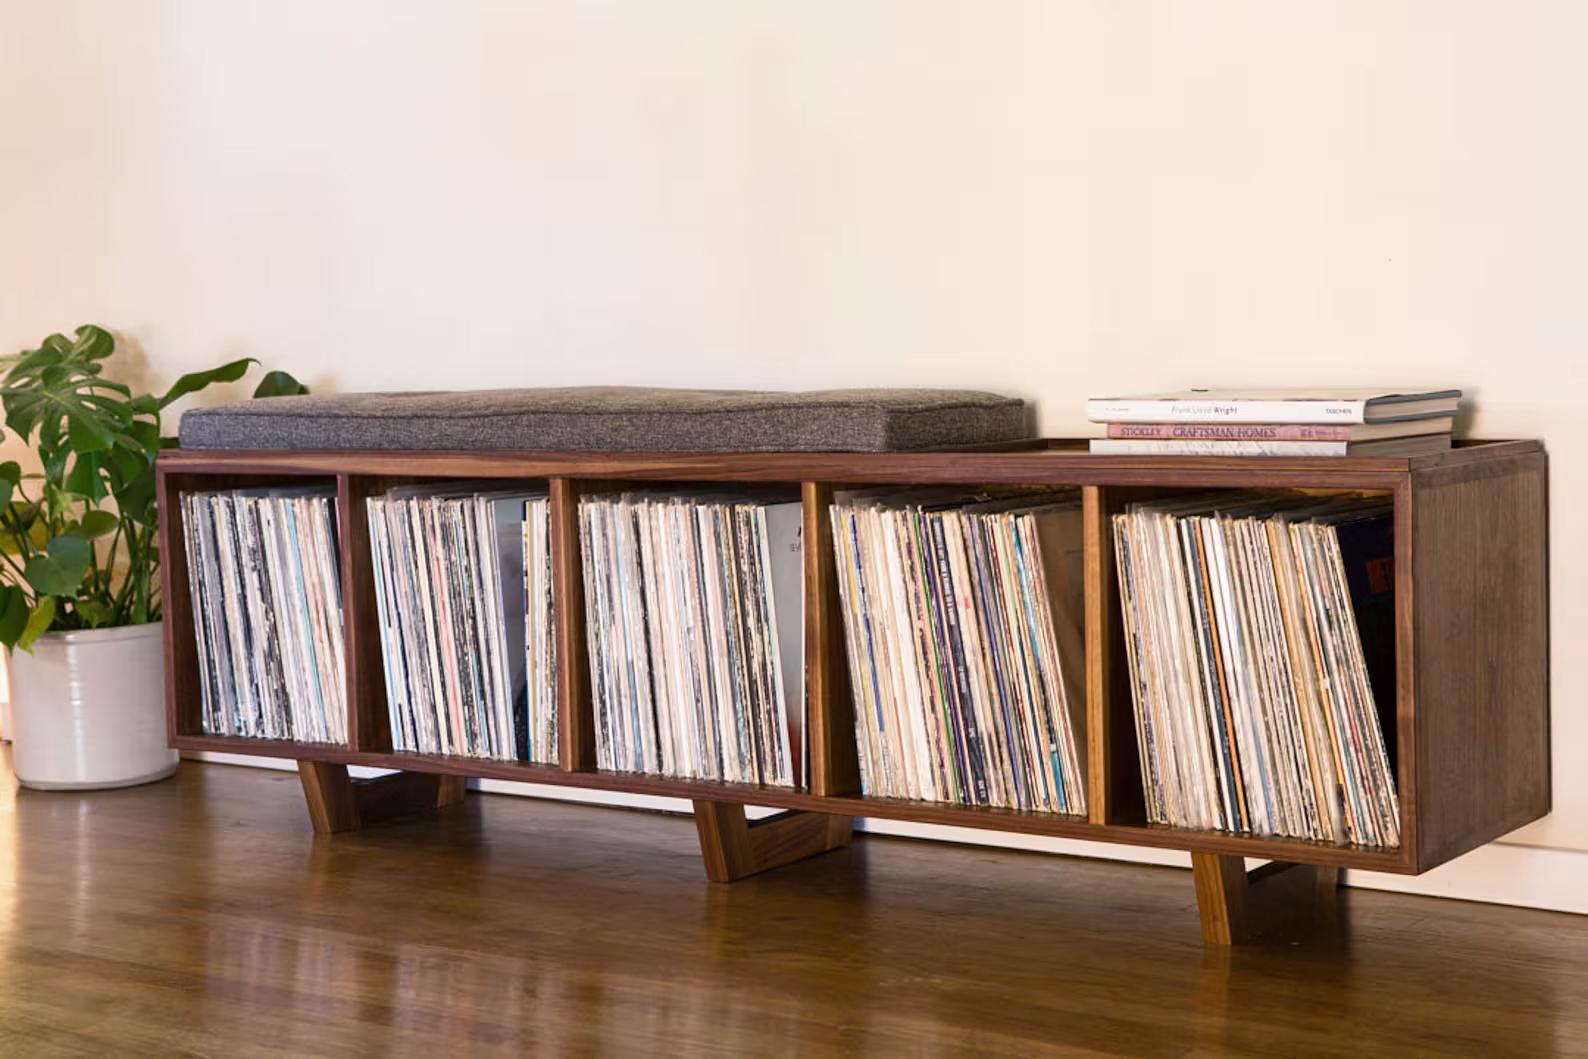 This bench is the ideal solution to having records sitting all over your house and no place to sit. This is an original design, but with a strong influence of Mid Century Danish Modern. The bench is roughly 67